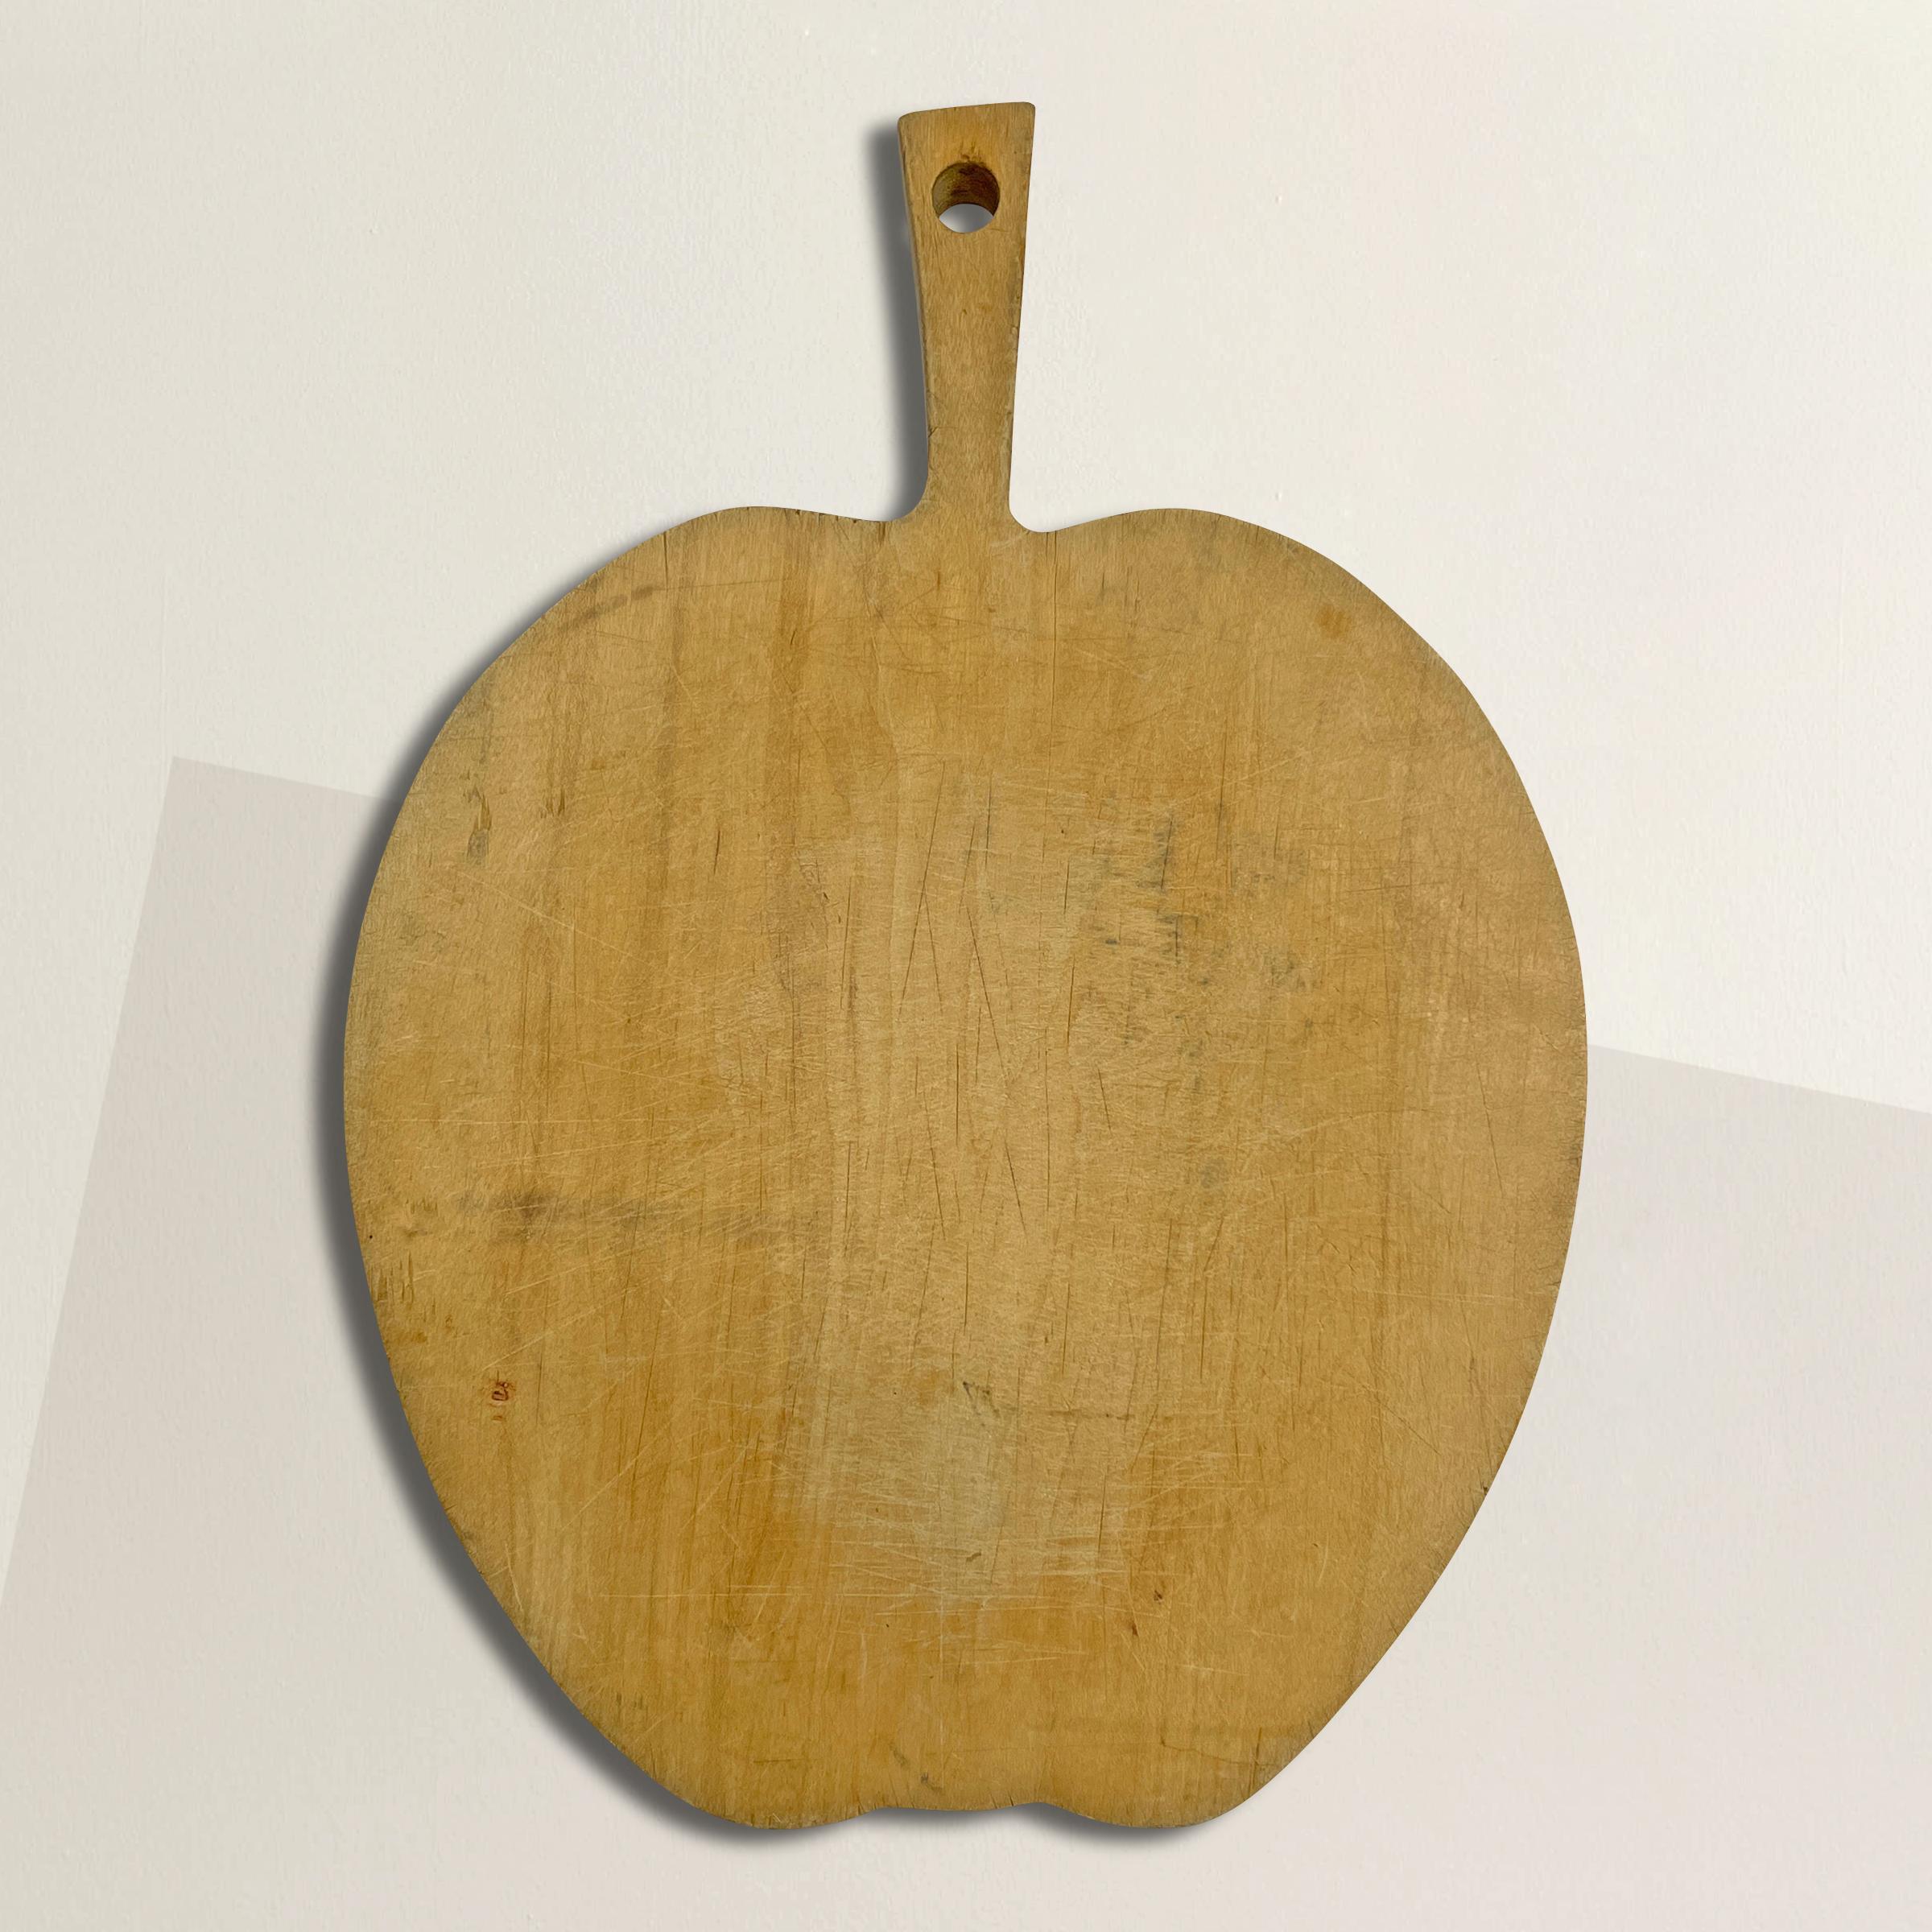 A quaint early 20th century English maple apple cutting board perfect for chopping fruits and veggies, or serving charcuterie at your next lunch party.